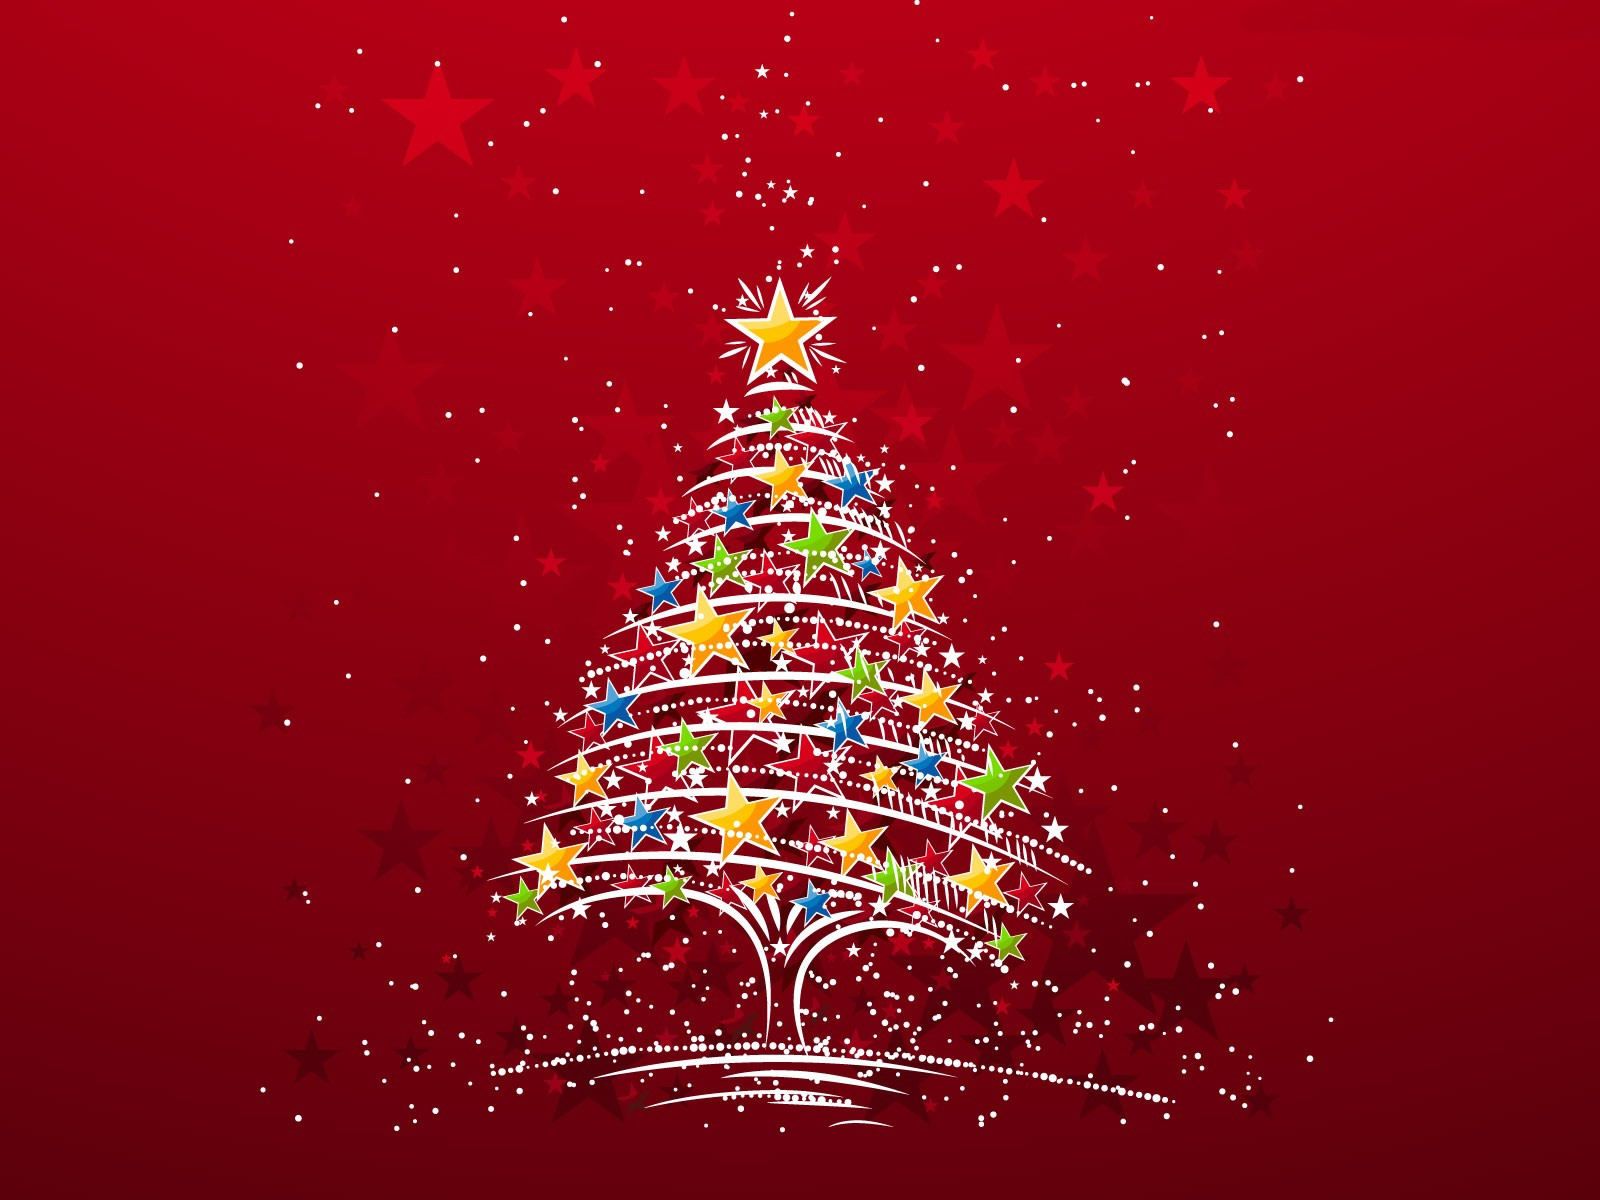 Free Christmas Wallpaper Backgrounds - Wallpapers HD Fine